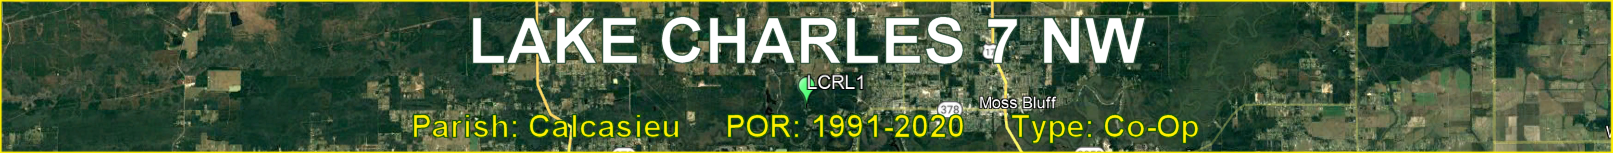 Title image for Lake Charles 7 NW